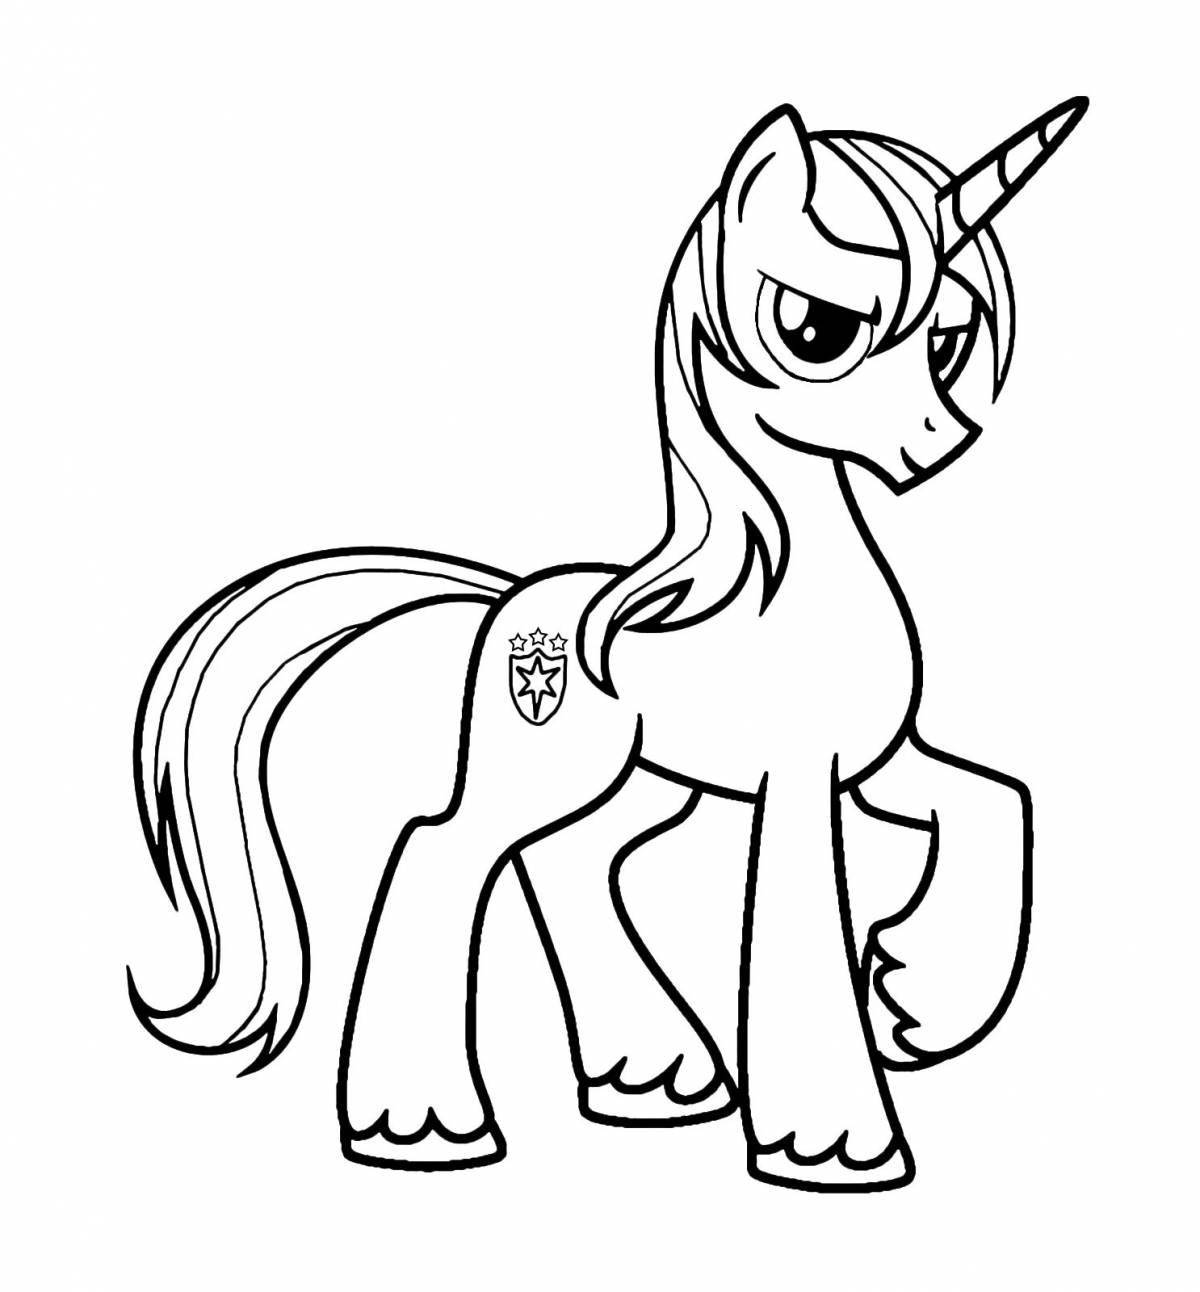 Coloring page charming pip pony